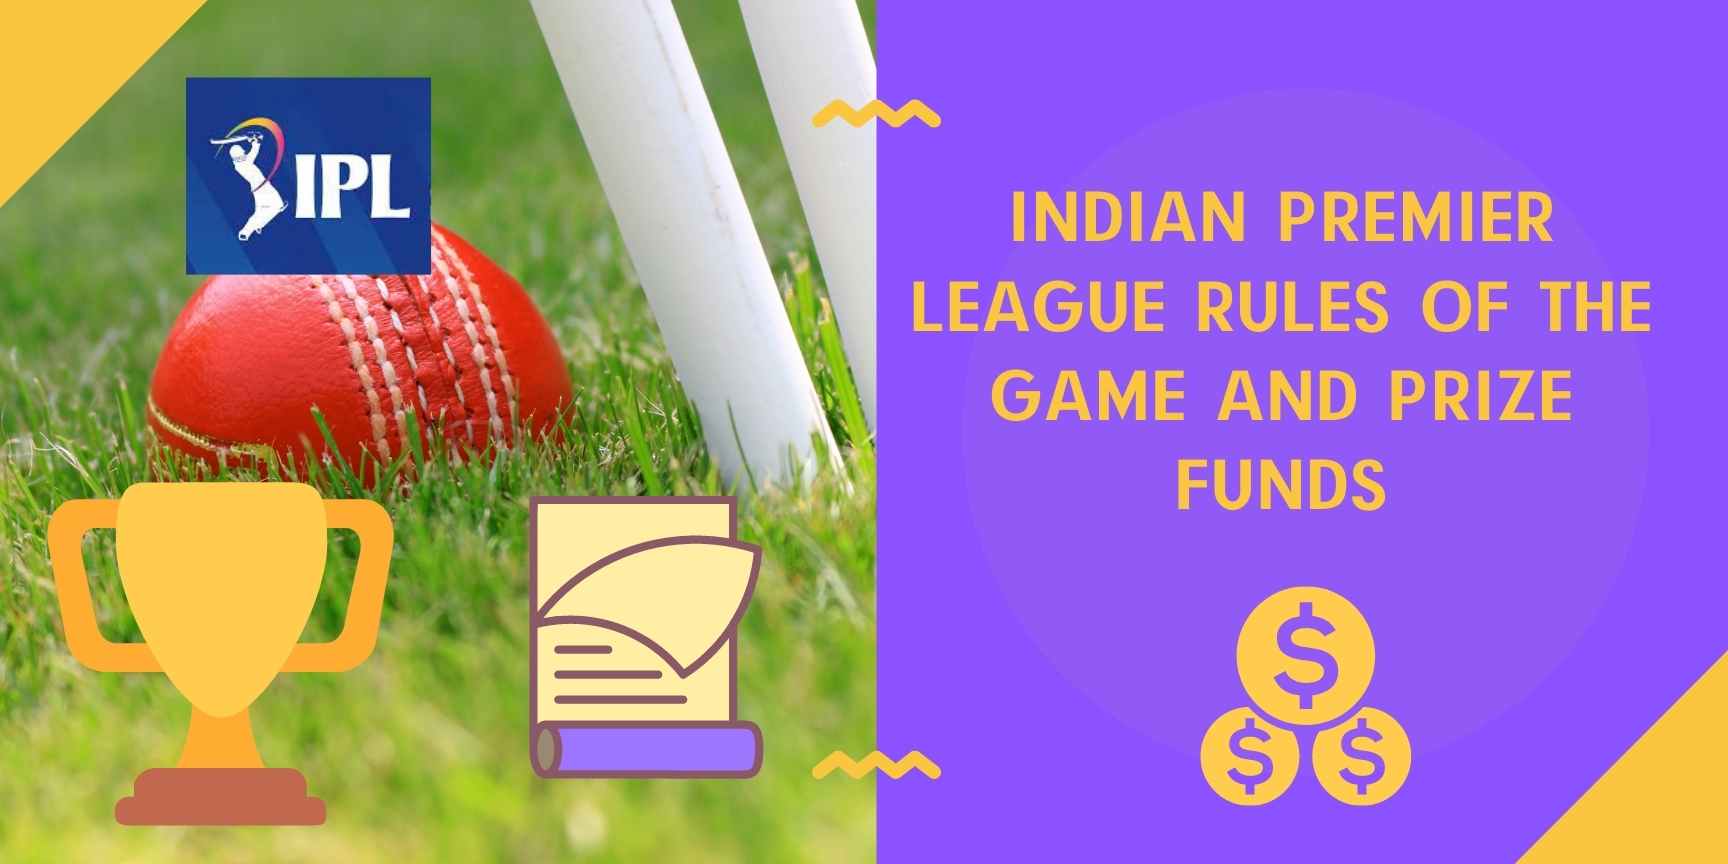 Indian Premier League rules of the game and prize funds